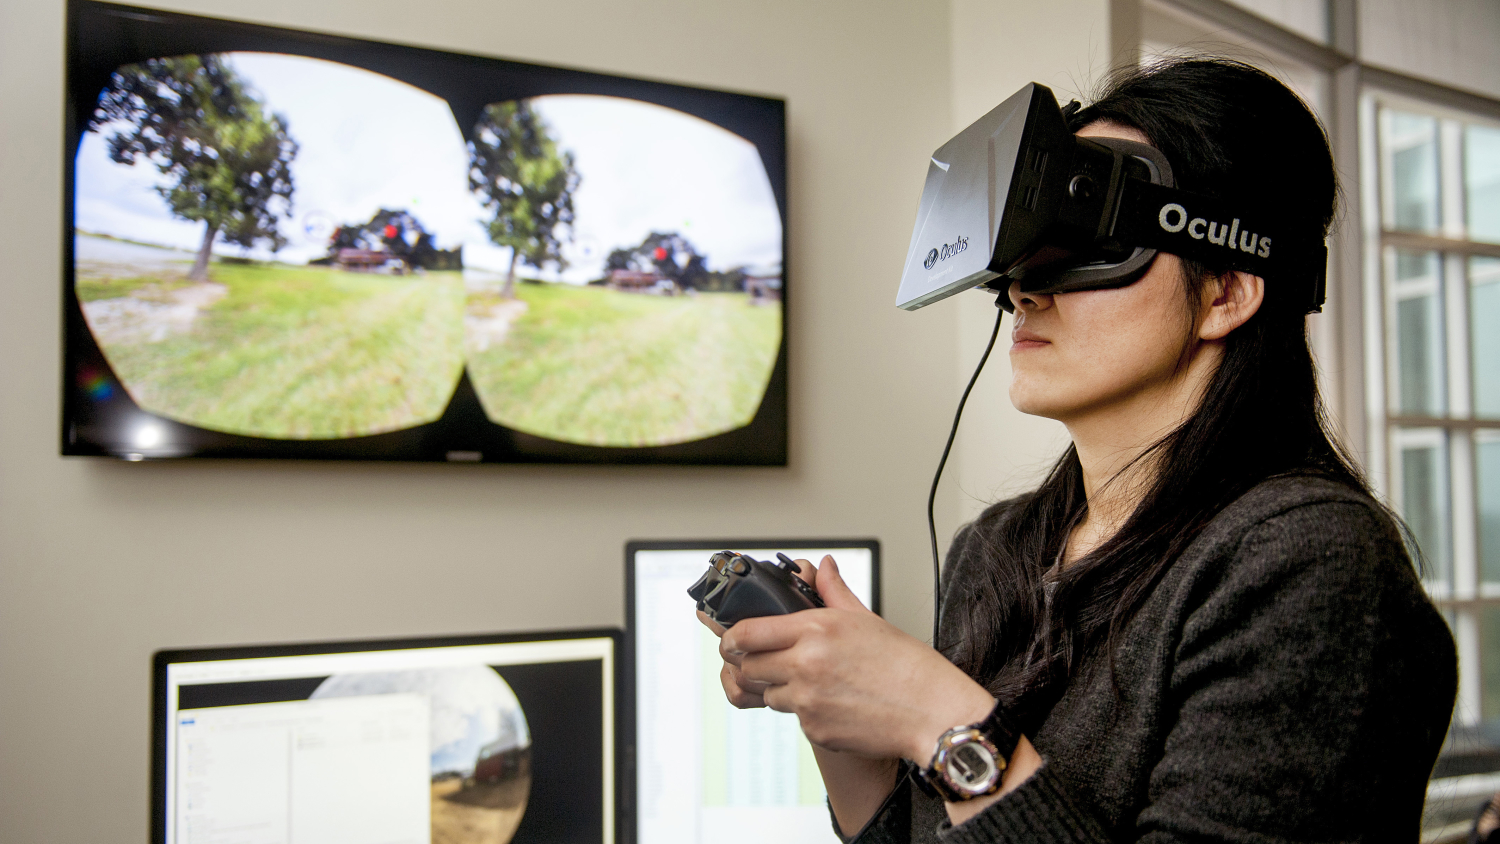 Female with Oculus headset - Emerging Opportunities and Jobs in the Bioeconomy